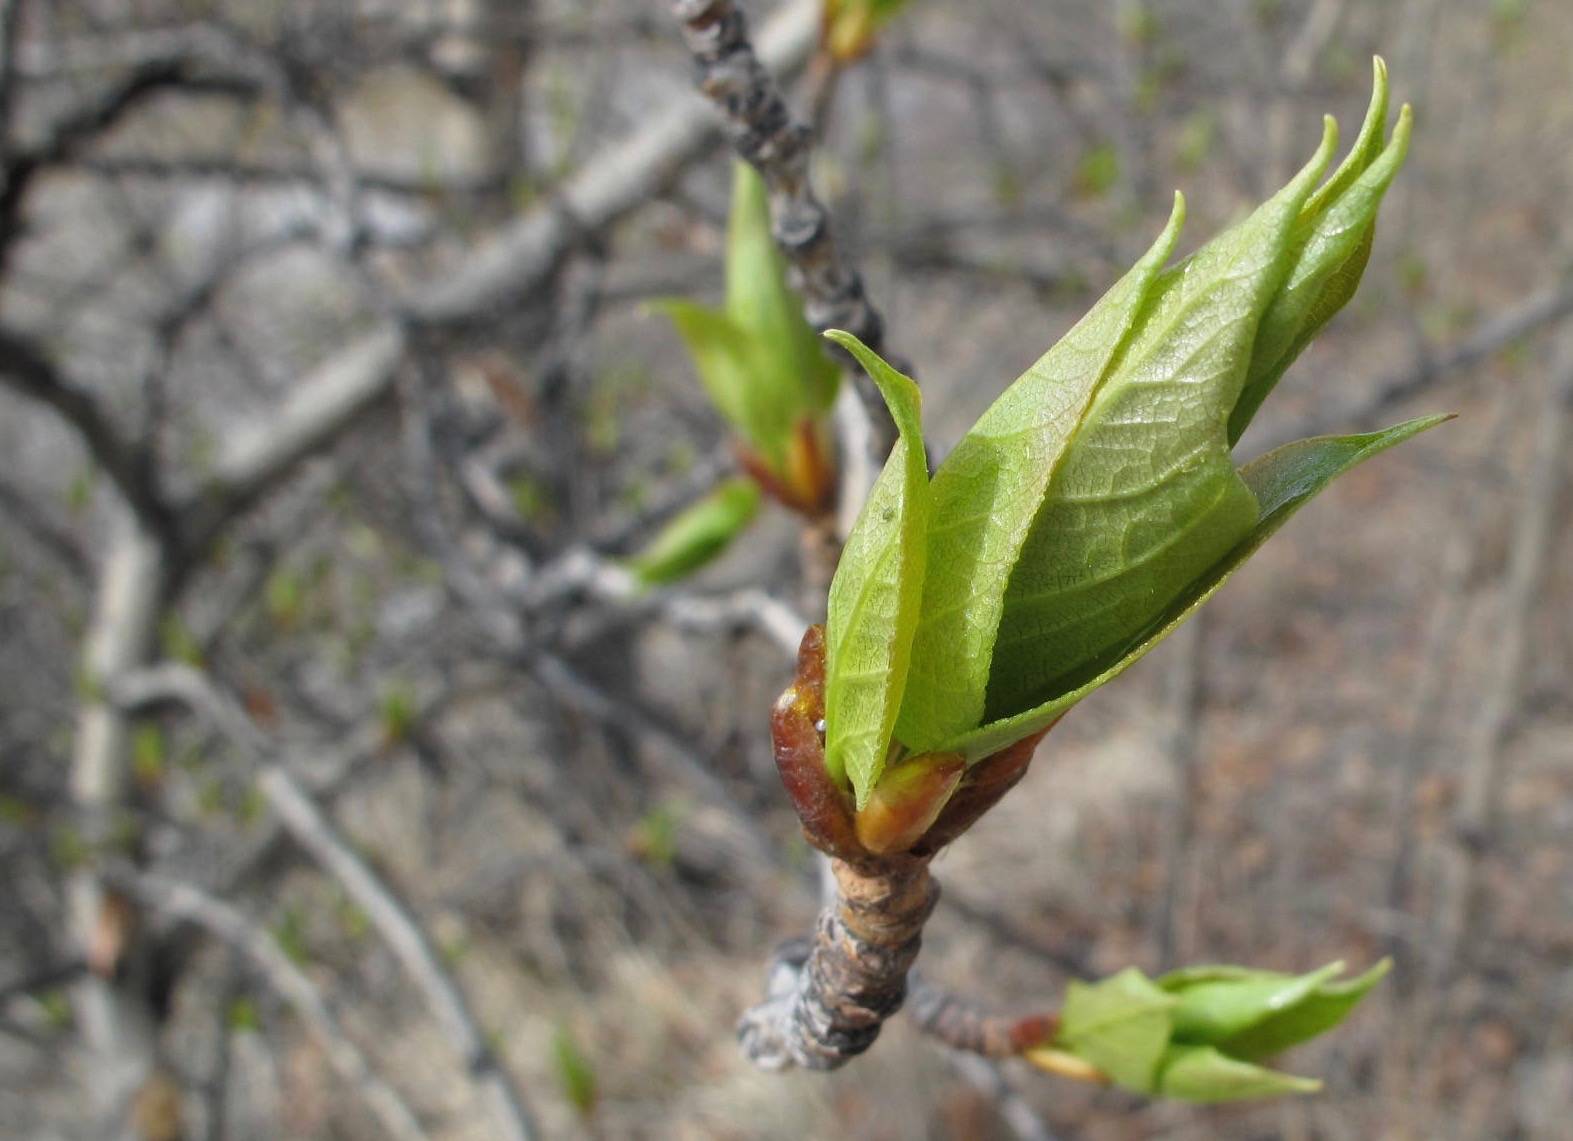 In Ferry, Alaska, a balsam poplar leaf emerges from a bud in May. (Courtesy Photo / Ned Rozell)